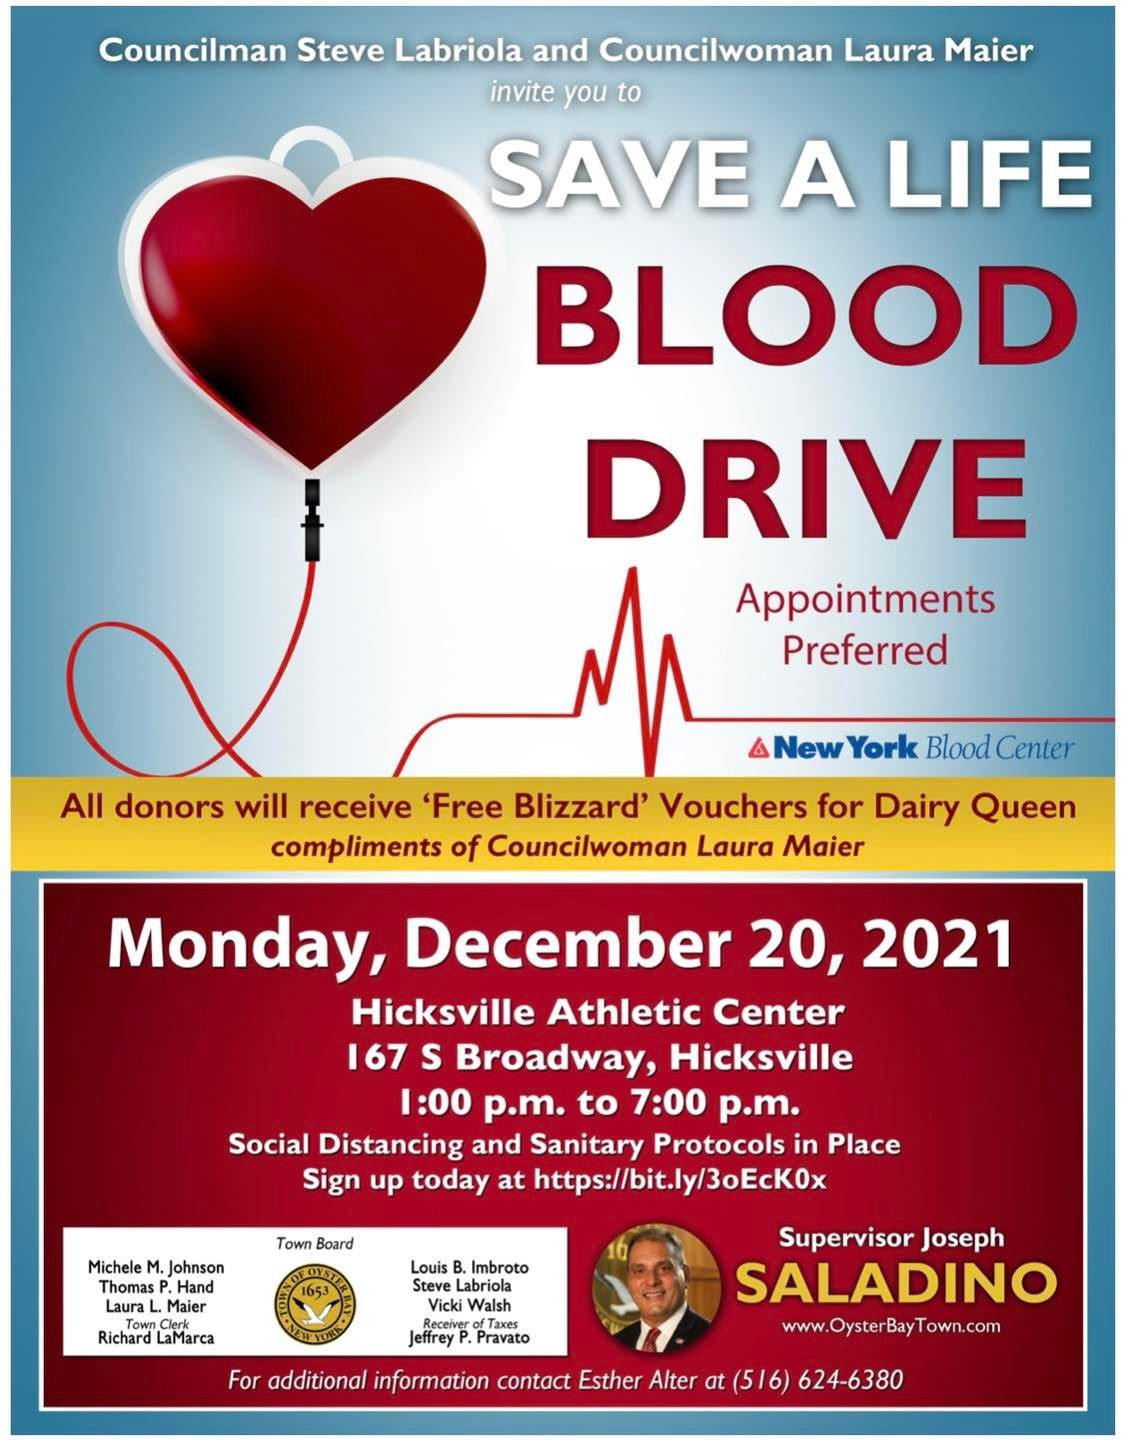 Labriola and Maier Urge Residents to Donate Blood December 20th as Supplies Are Needed to Help Replenish Hospitals